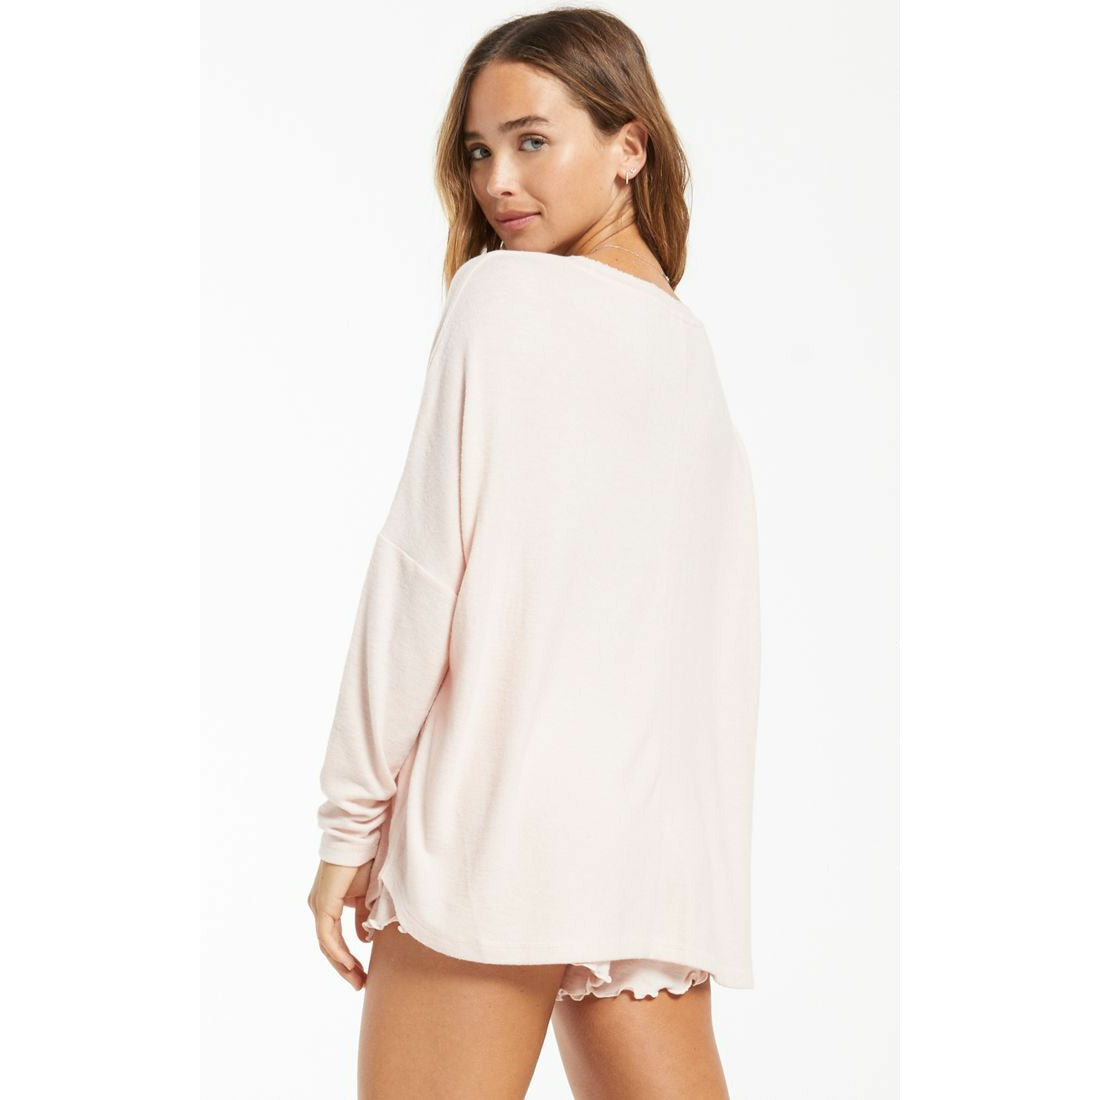 Hang Out Long Sleeve Top